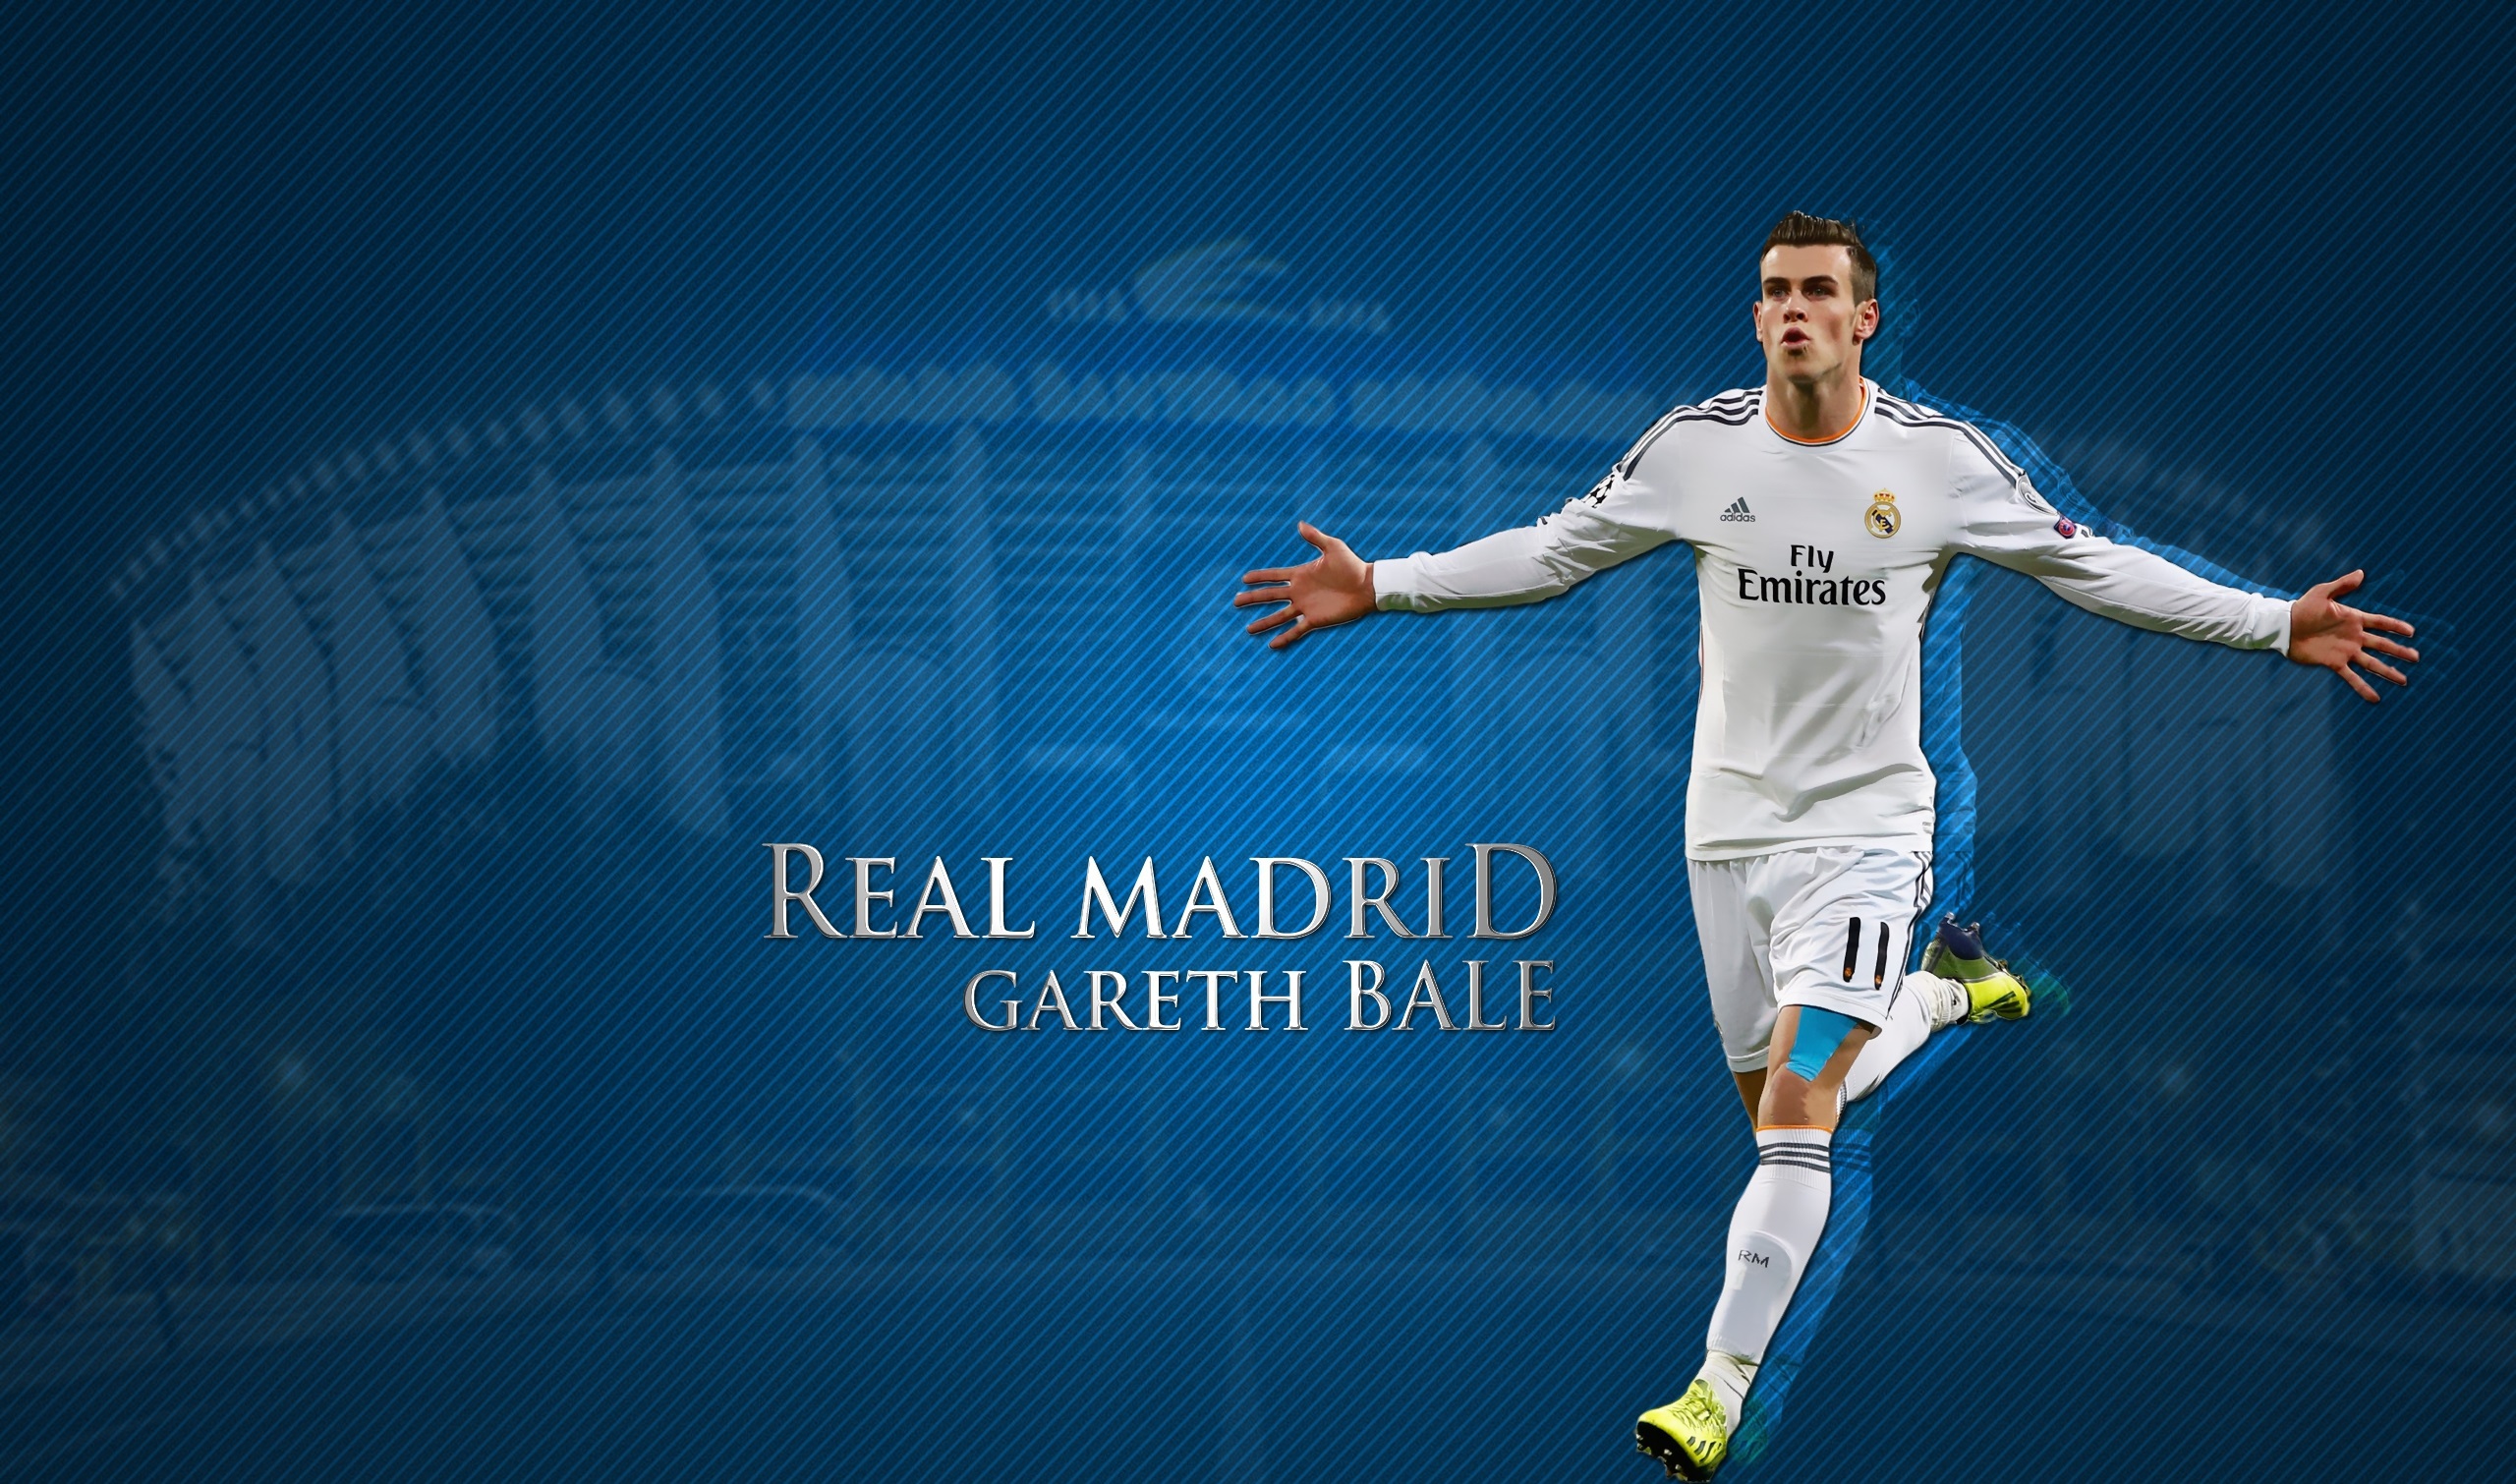 Gareth Bale Wallpaper Image Photos Pictures Background